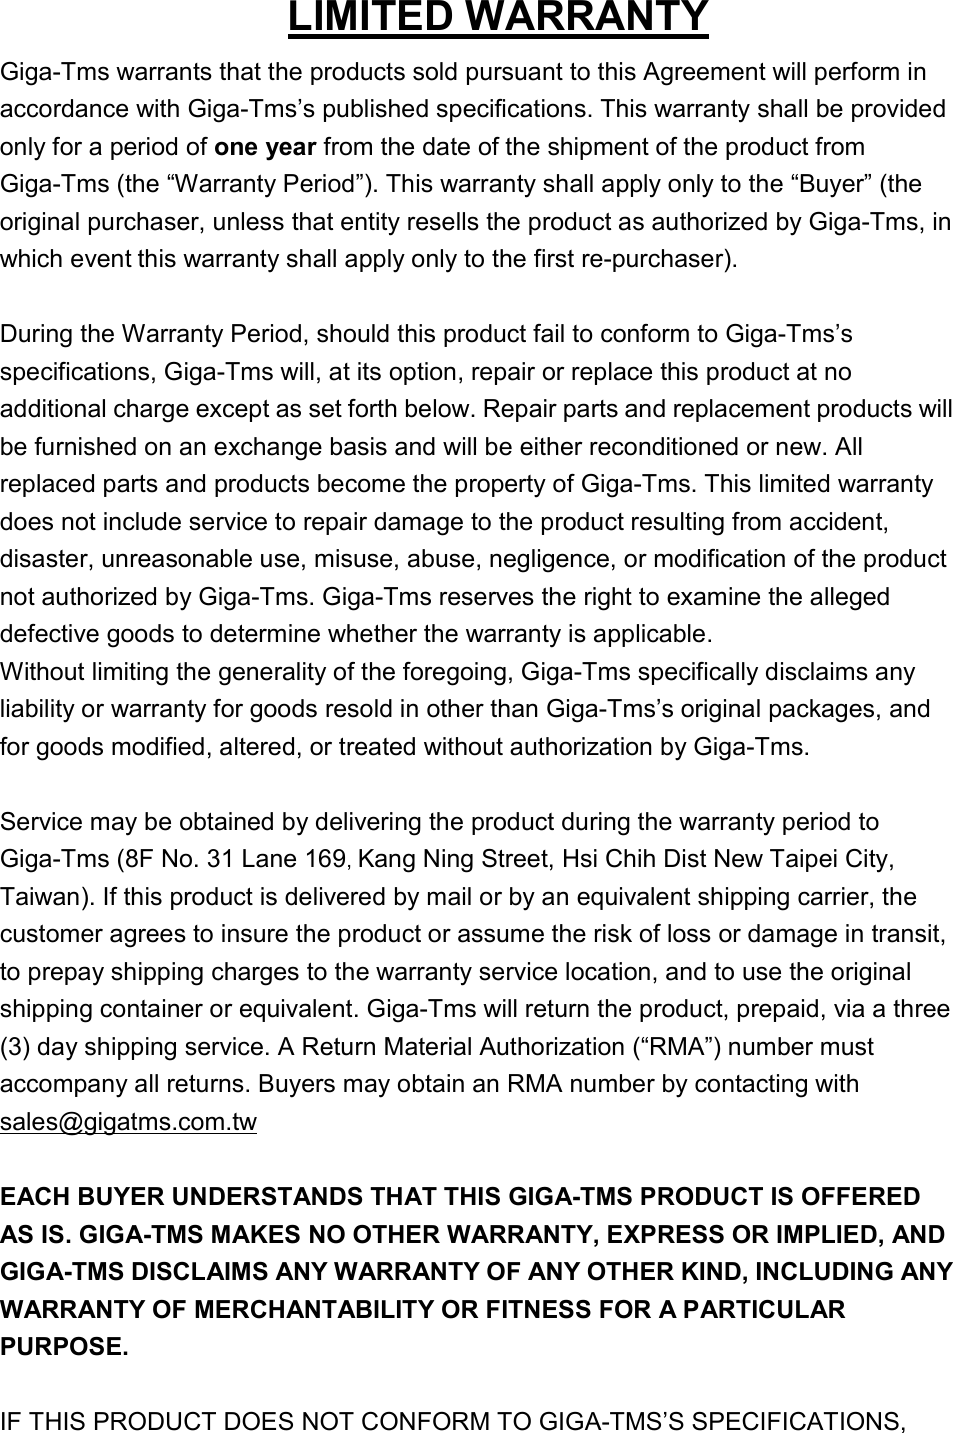 LIMITED WARRANTY Giga-Tms warrants that the products sold pursuant to this Agreement will perform in accordance with Giga-Tms’s published specifications. This warranty shall be provided only for a period of one year from the date of the shipment of the product from Giga-Tms (the “Warranty Period”). This warranty shall apply only to the “Buyer” (the original purchaser, unless that entity resells the product as authorized by Giga-Tms, in which event this warranty shall apply only to the first re-purchaser).  During the Warranty Period, should this product fail to conform to Giga-Tms’s specifications, Giga-Tms will, at its option, repair or replace this product at no additional charge except as set forth below. Repair parts and replacement products will be furnished on an exchange basis and will be either reconditioned or new. All replaced parts and products become the property of Giga-Tms. This limited warranty does not include service to repair damage to the product resulting from accident, disaster, unreasonable use, misuse, abuse, negligence, or modification of the product not authorized by Giga-Tms. Giga-Tms reserves the right to examine the alleged defective goods to determine whether the warranty is applicable.   Without limiting the generality of the foregoing, Giga-Tms specifically disclaims any liability or warranty for goods resold in other than Giga-Tms’s original packages, and for goods modified, altered, or treated without authorization by Giga-Tms.  Service may be obtained by delivering the product during the warranty period to Giga-Tms (8F No. 31 Lane 169, Kang Ning Street, Hsi Chih Dist New Taipei City, Taiwan). If this product is delivered by mail or by an equivalent shipping carrier, the customer agrees to insure the product or assume the risk of loss or damage in transit, to prepay shipping charges to the warranty service location, and to use the original shipping container or equivalent. Giga-Tms will return the product, prepaid, via a three (3) day shipping service. A Return Material Authorization (“RMA”) number must accompany all returns. Buyers may obtain an RMA number by contacting with sales@gigatms.com.tw  EACH BUYER UNDERSTANDS THAT THIS GIGA-TMS PRODUCT IS OFFERED AS IS. GIGA-TMS MAKES NO OTHER WARRANTY, EXPRESS OR IMPLIED, AND GIGA-TMS DISCLAIMS ANY WARRANTY OF ANY OTHER KIND, INCLUDING ANY WARRANTY OF MERCHANTABILITY OR FITNESS FOR A PARTICULAR PURPOSE.    IF THIS PRODUCT DOES NOT CONFORM TO GIGA-TMS’S SPECIFICATIONS, 